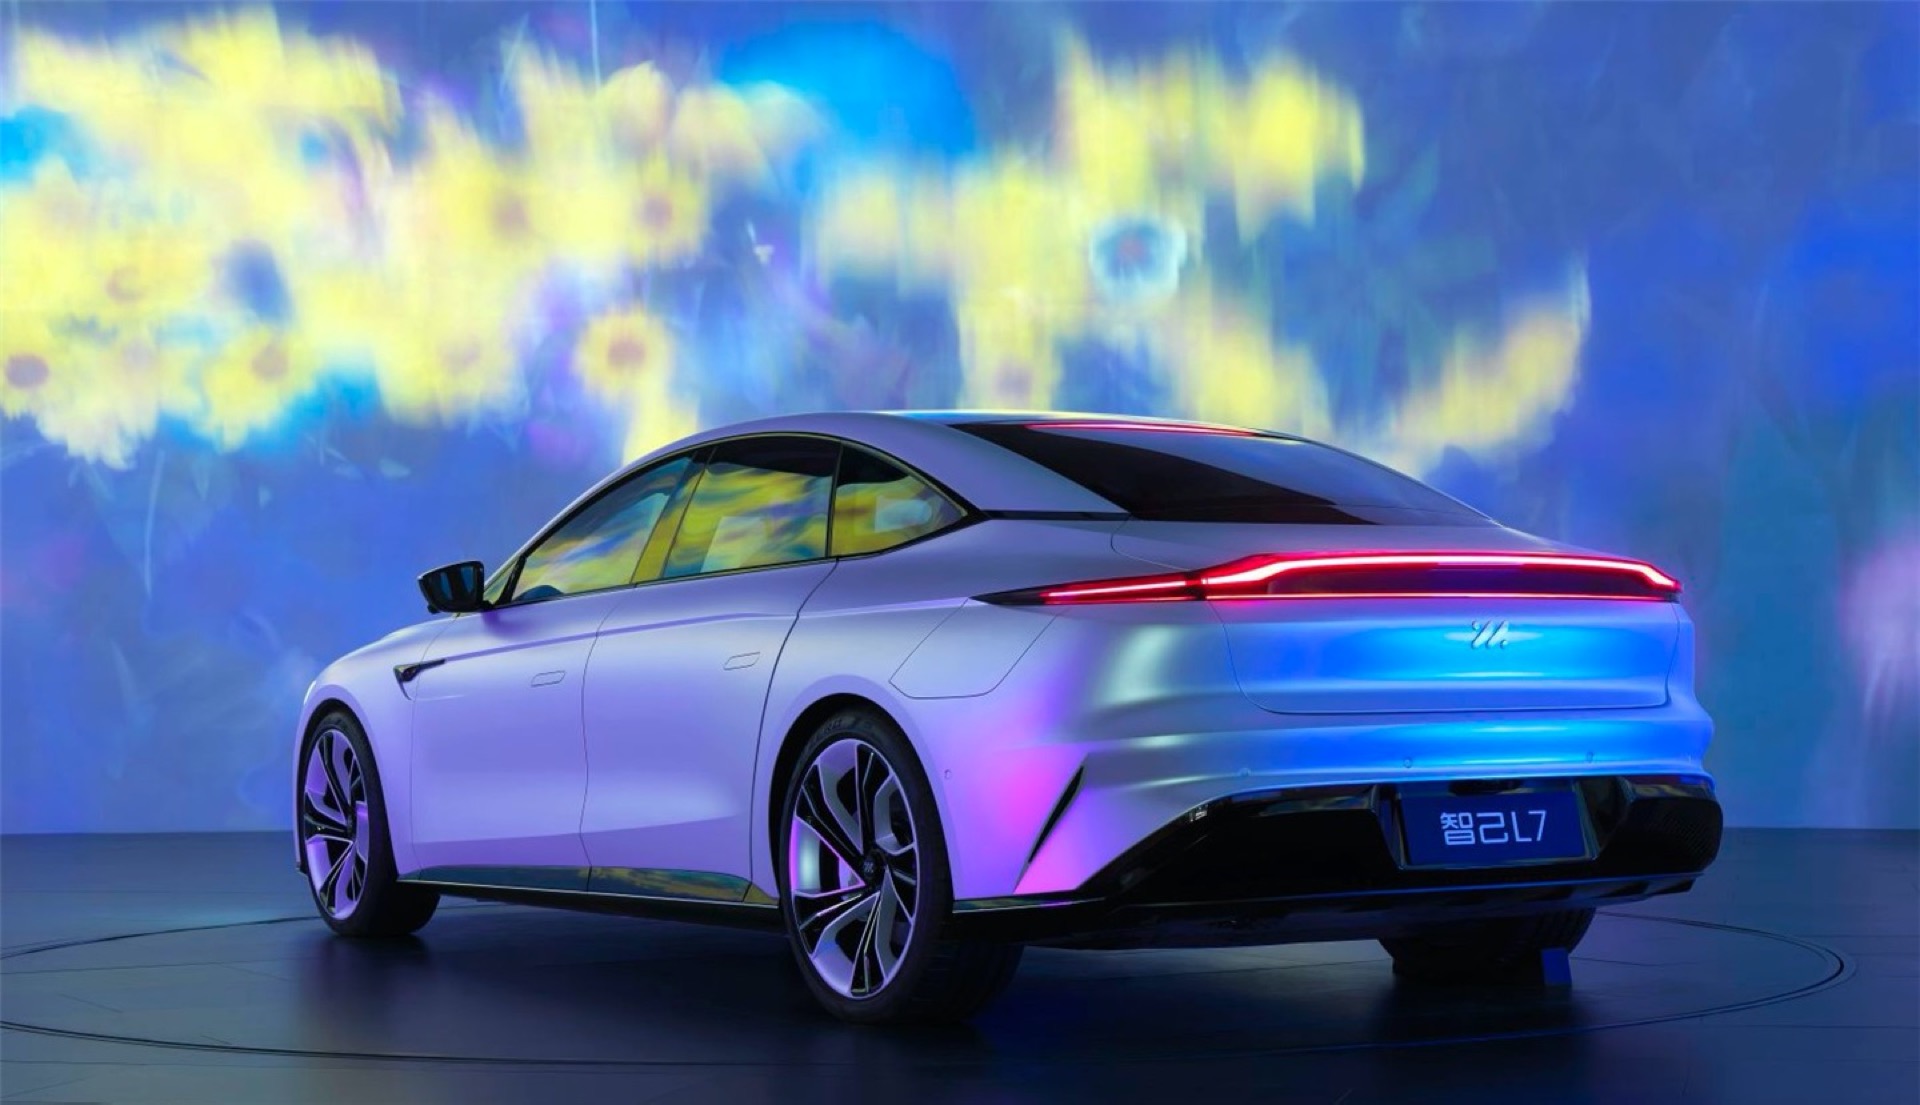 Zhiji L7 Is An Electric Sports Sedan From China With Wireless Charging ...